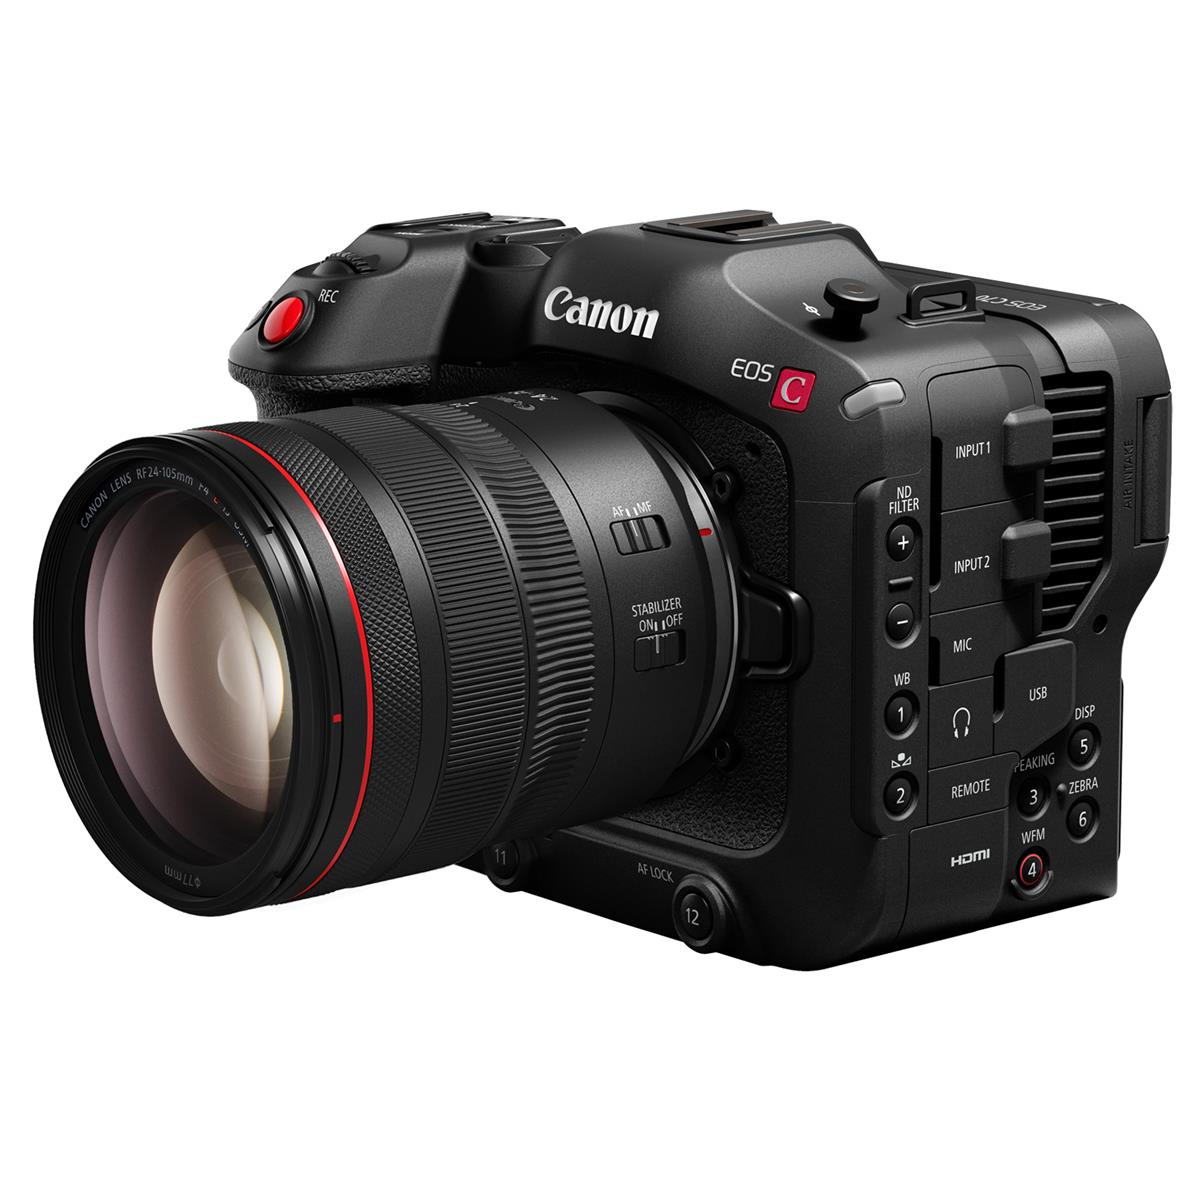 Image of Canon EOS C70 Digital Camera with RF 24-105mm f/4 L IS USM Lens